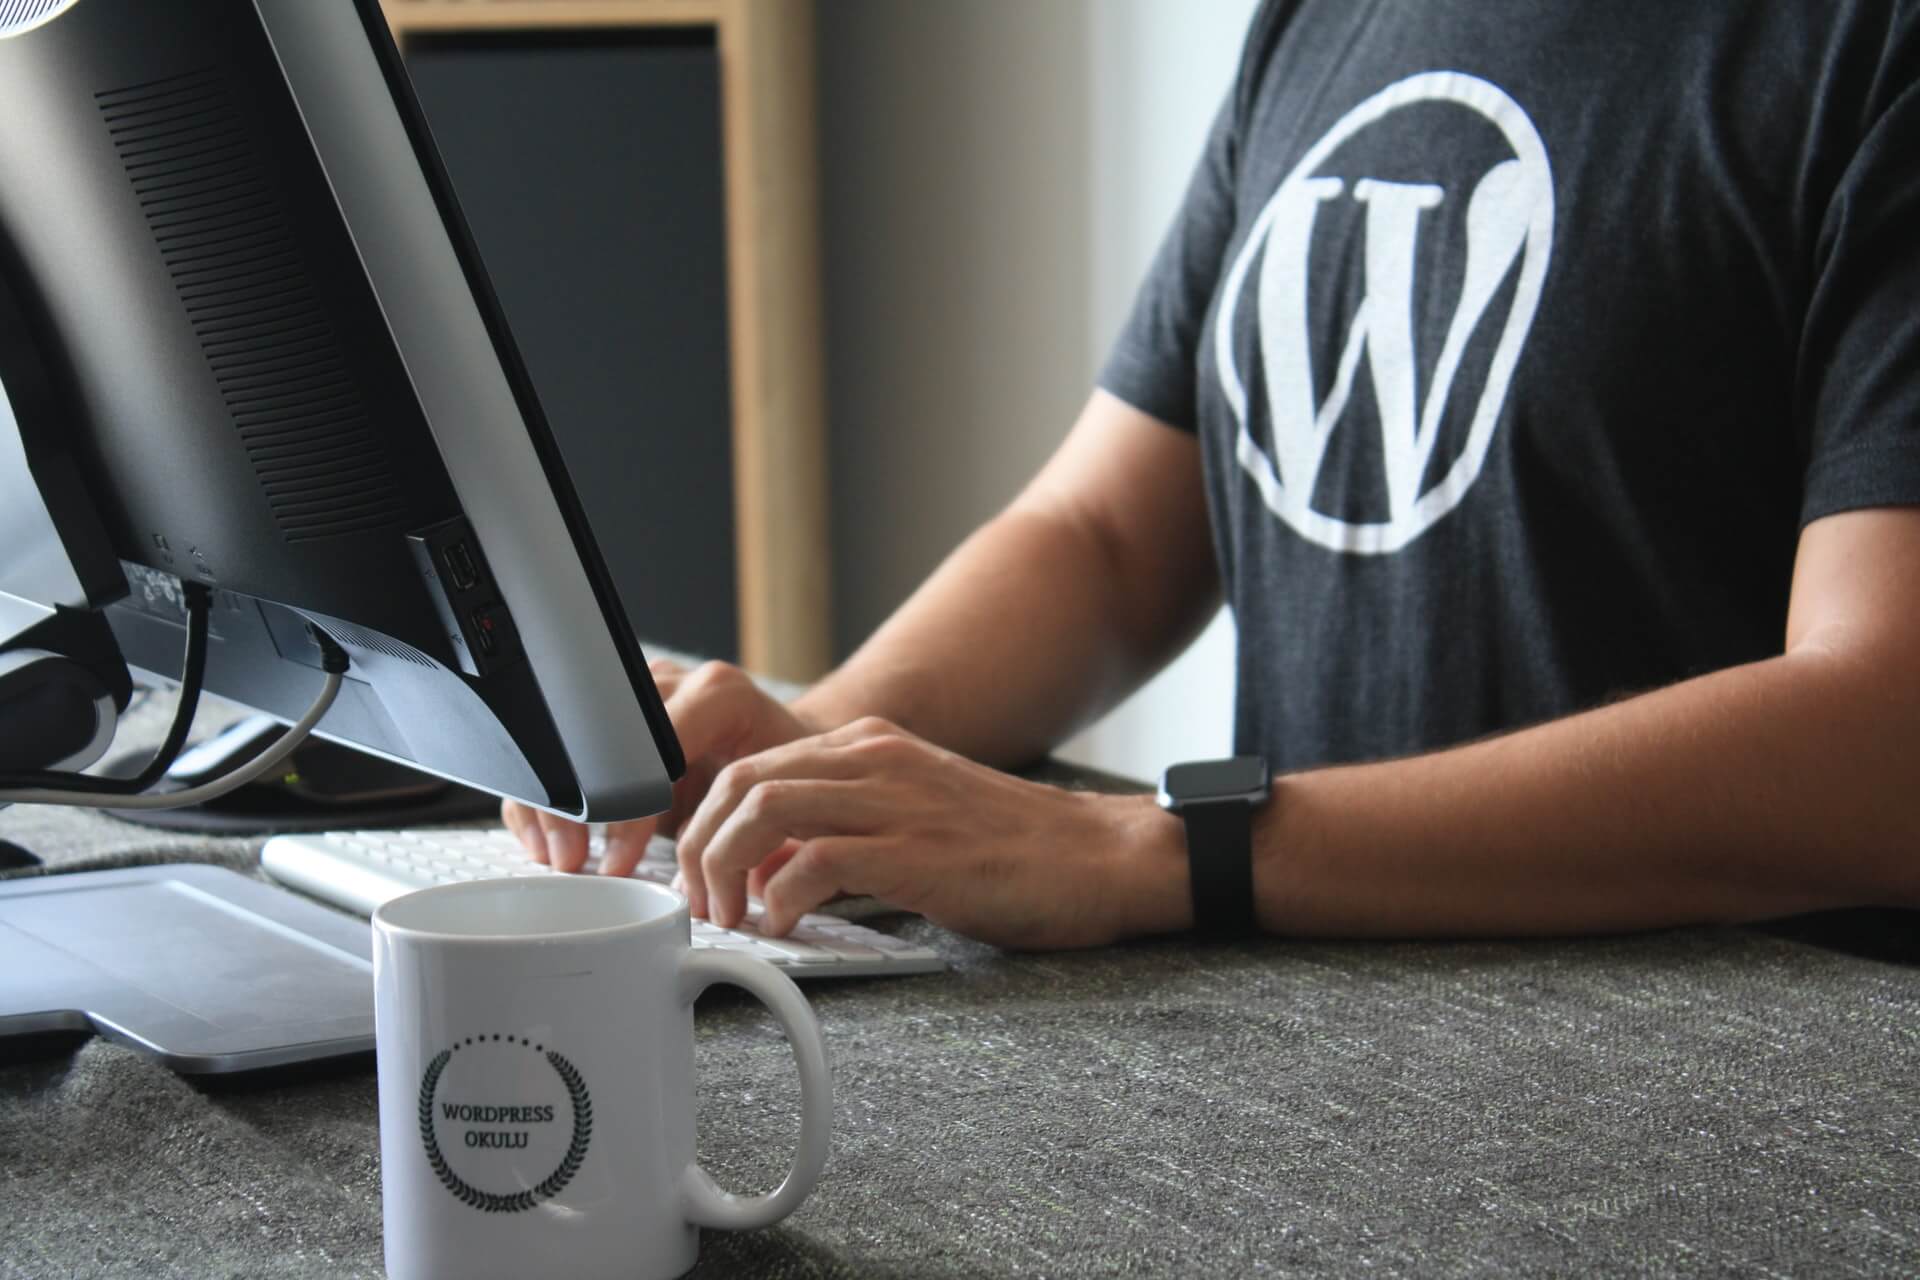 Looking for the Best WordPress Themes for your new blog